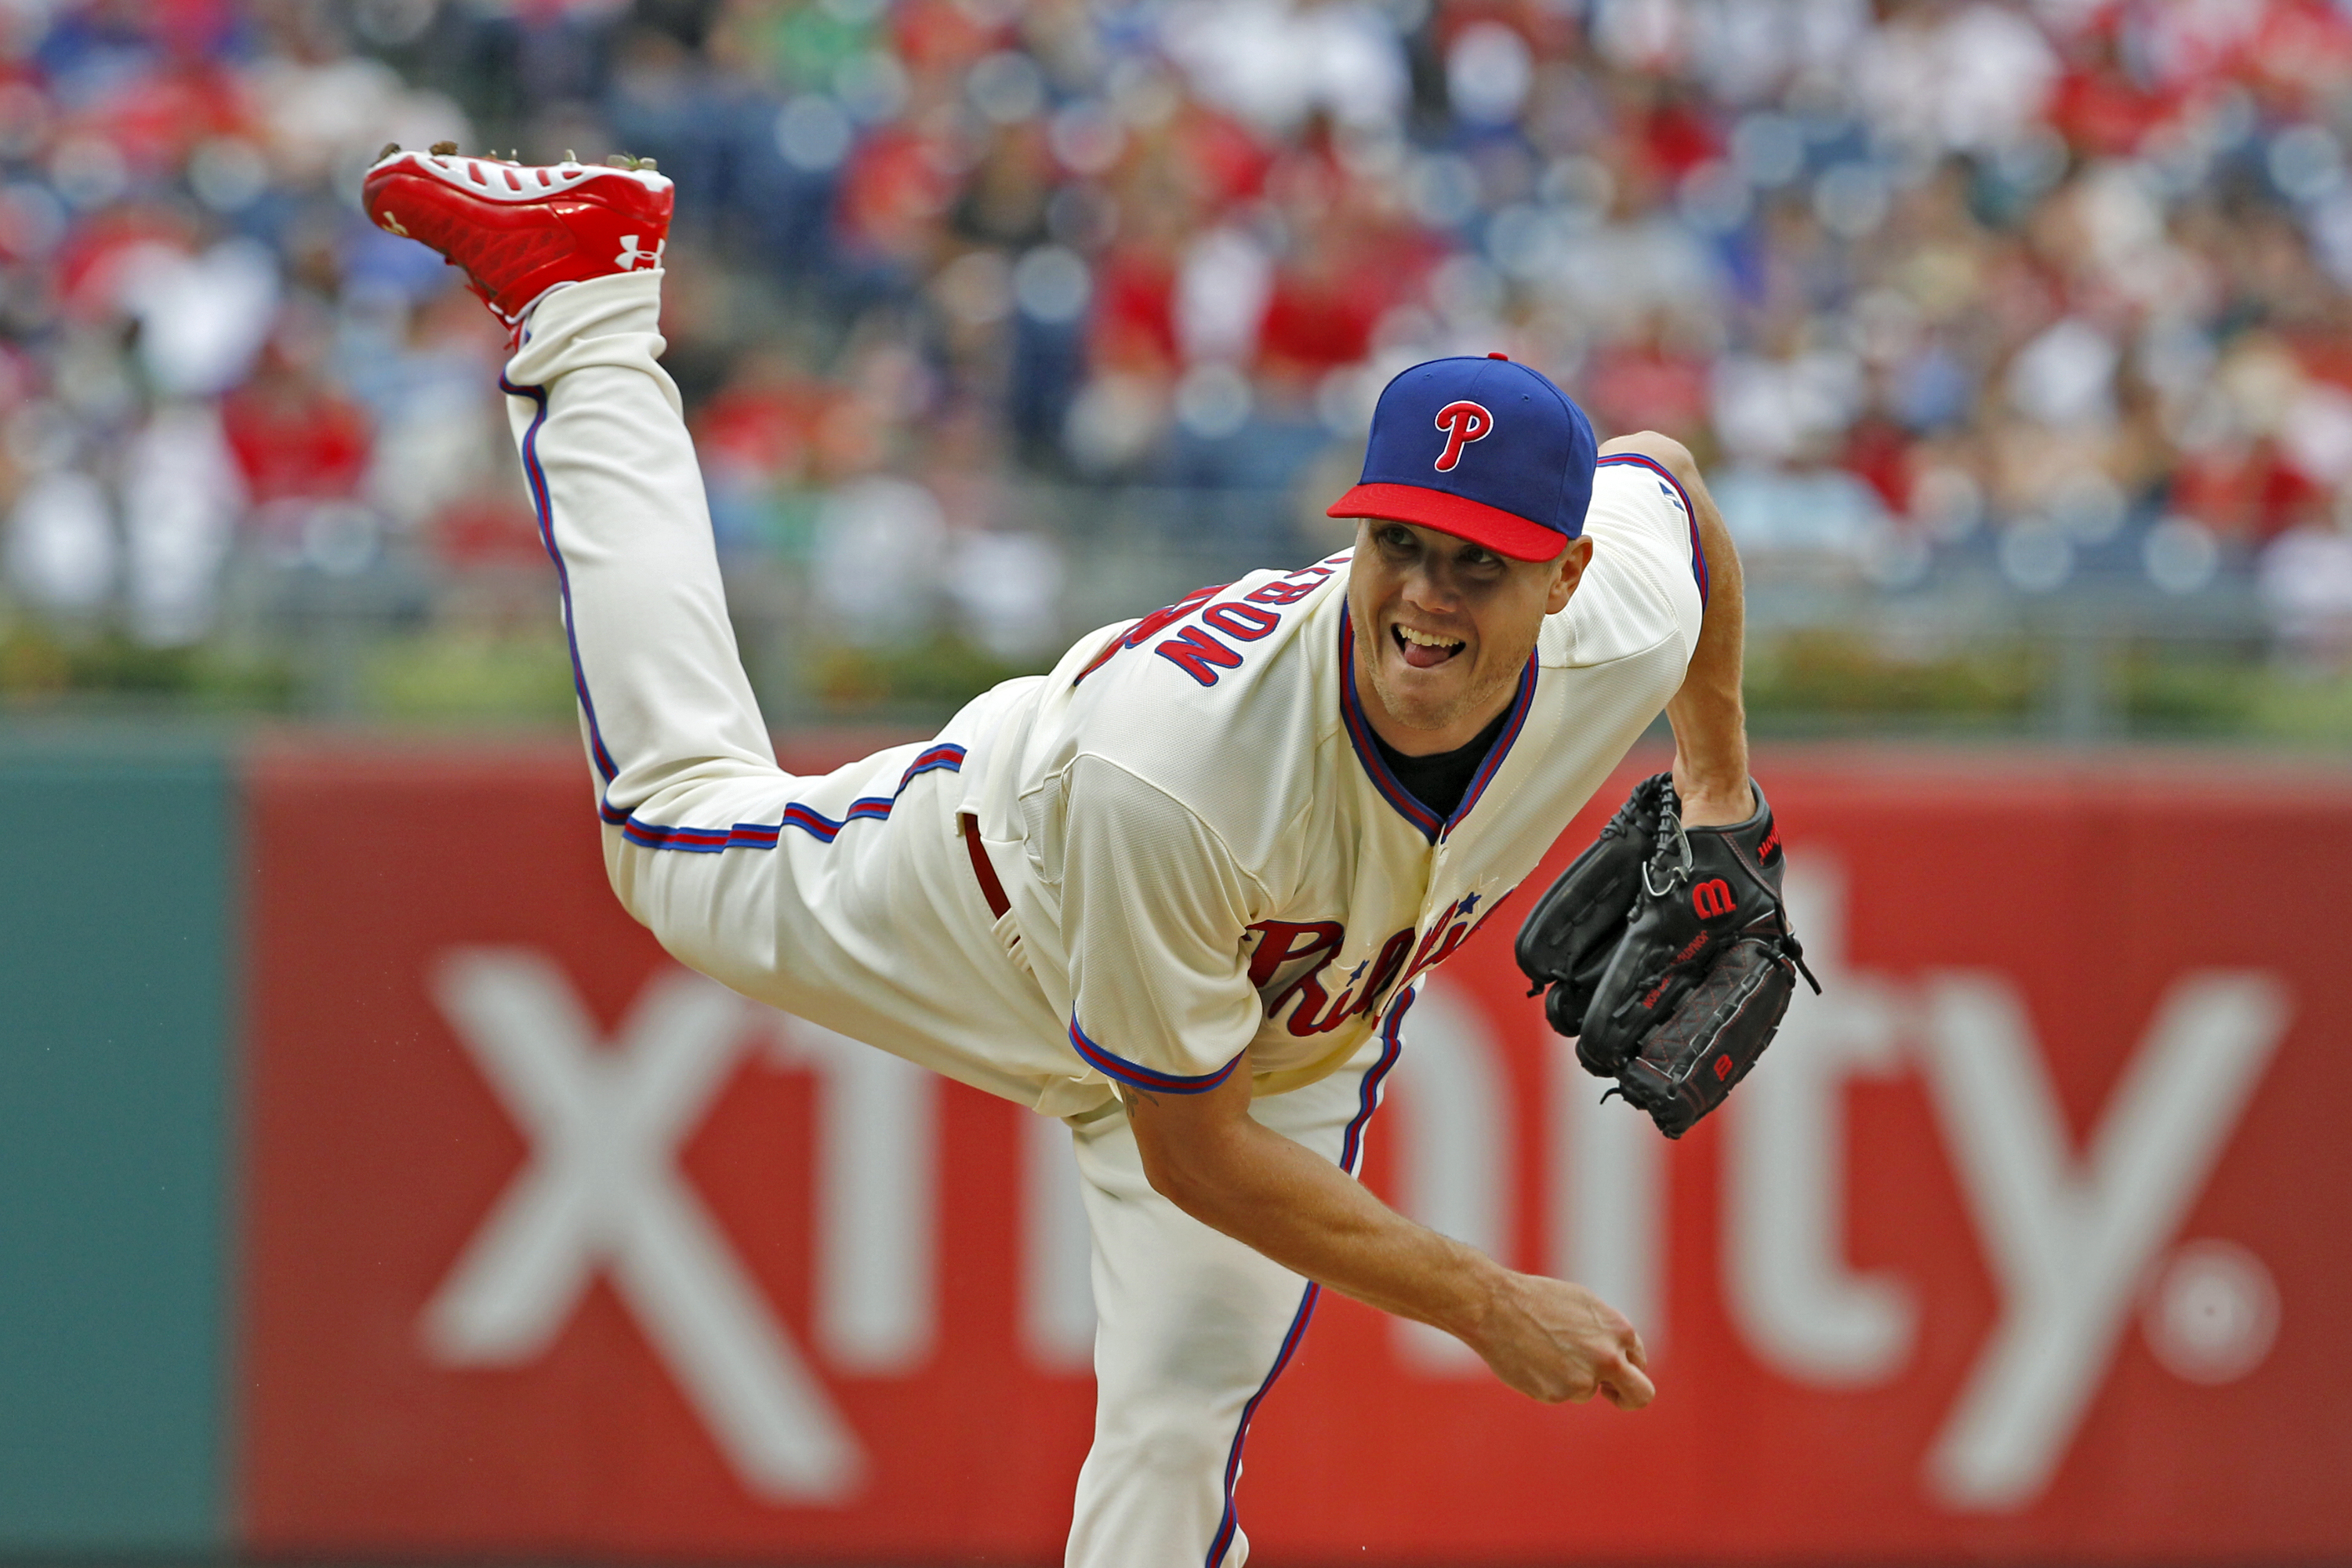 Does the Phillies' Jonathan Papelbon have the toughest job in sports?